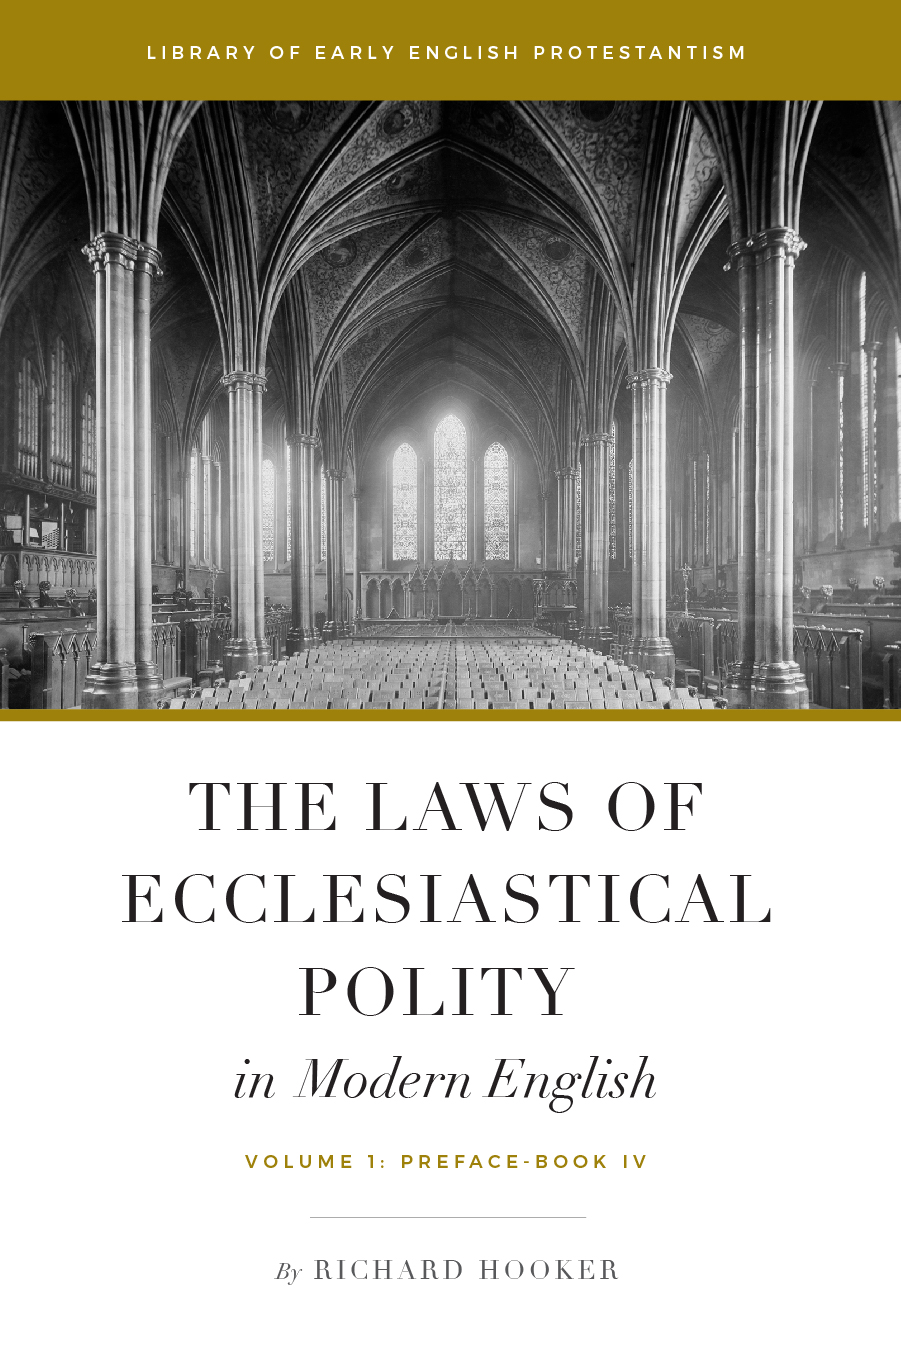 The Laws of Ecclesiastical Polity in Modern English